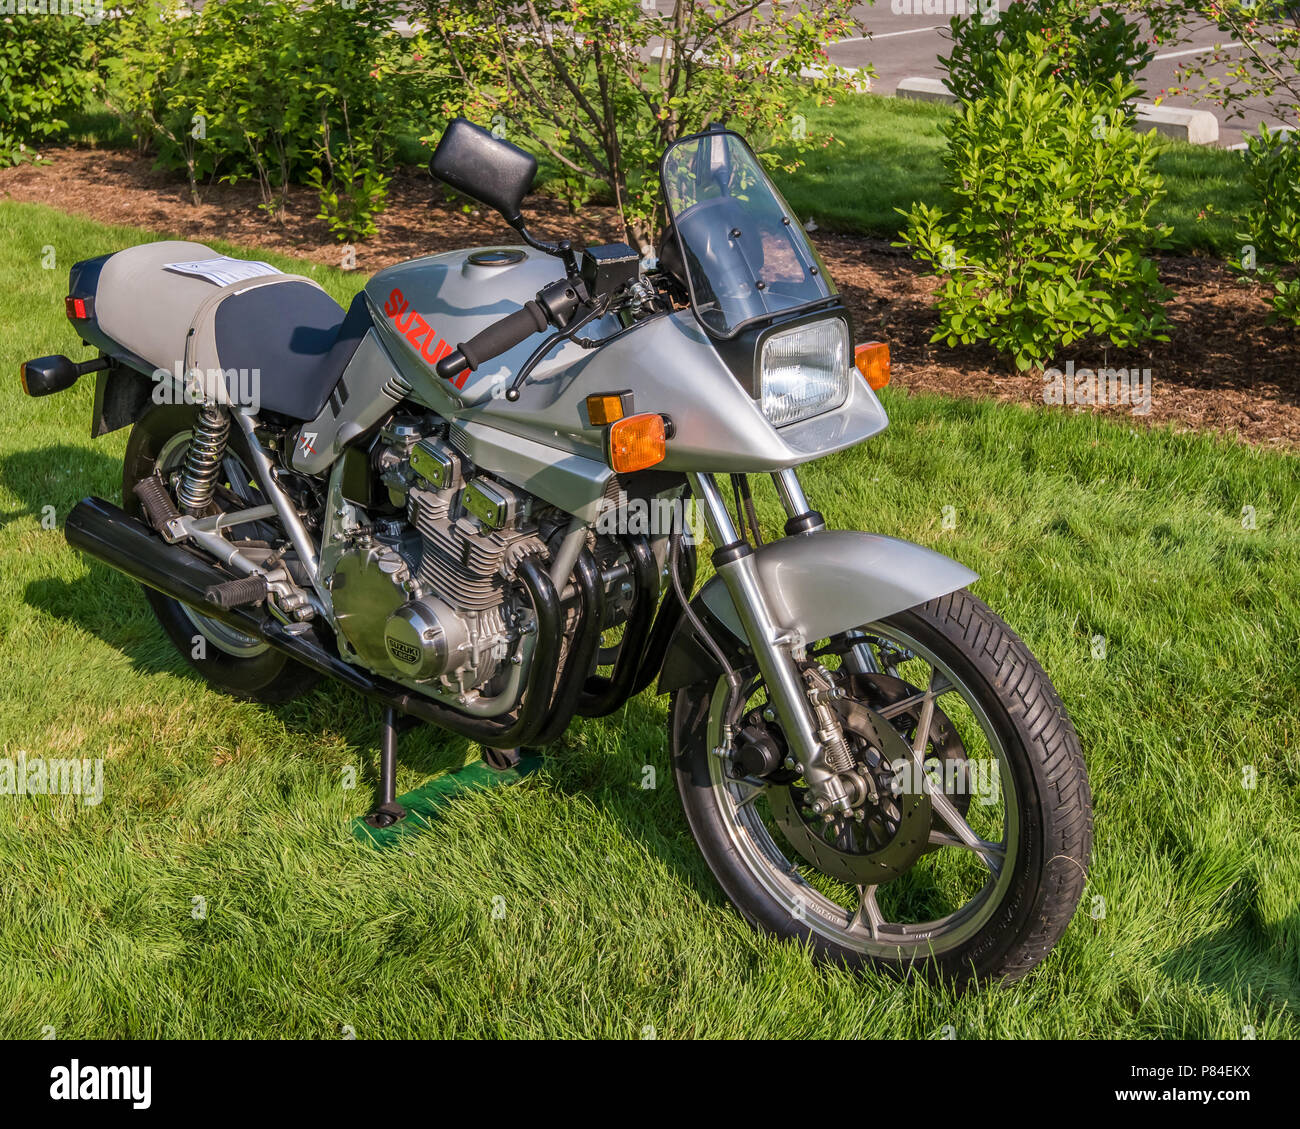 GROSSE POINTE SHORES, MI/USA - JUNE 17, 2018: A 1982 Suzuki Katana motorcycle at the EyesOn Design car show, held at the Edsel and Eleanor Ford House, Stock Photo